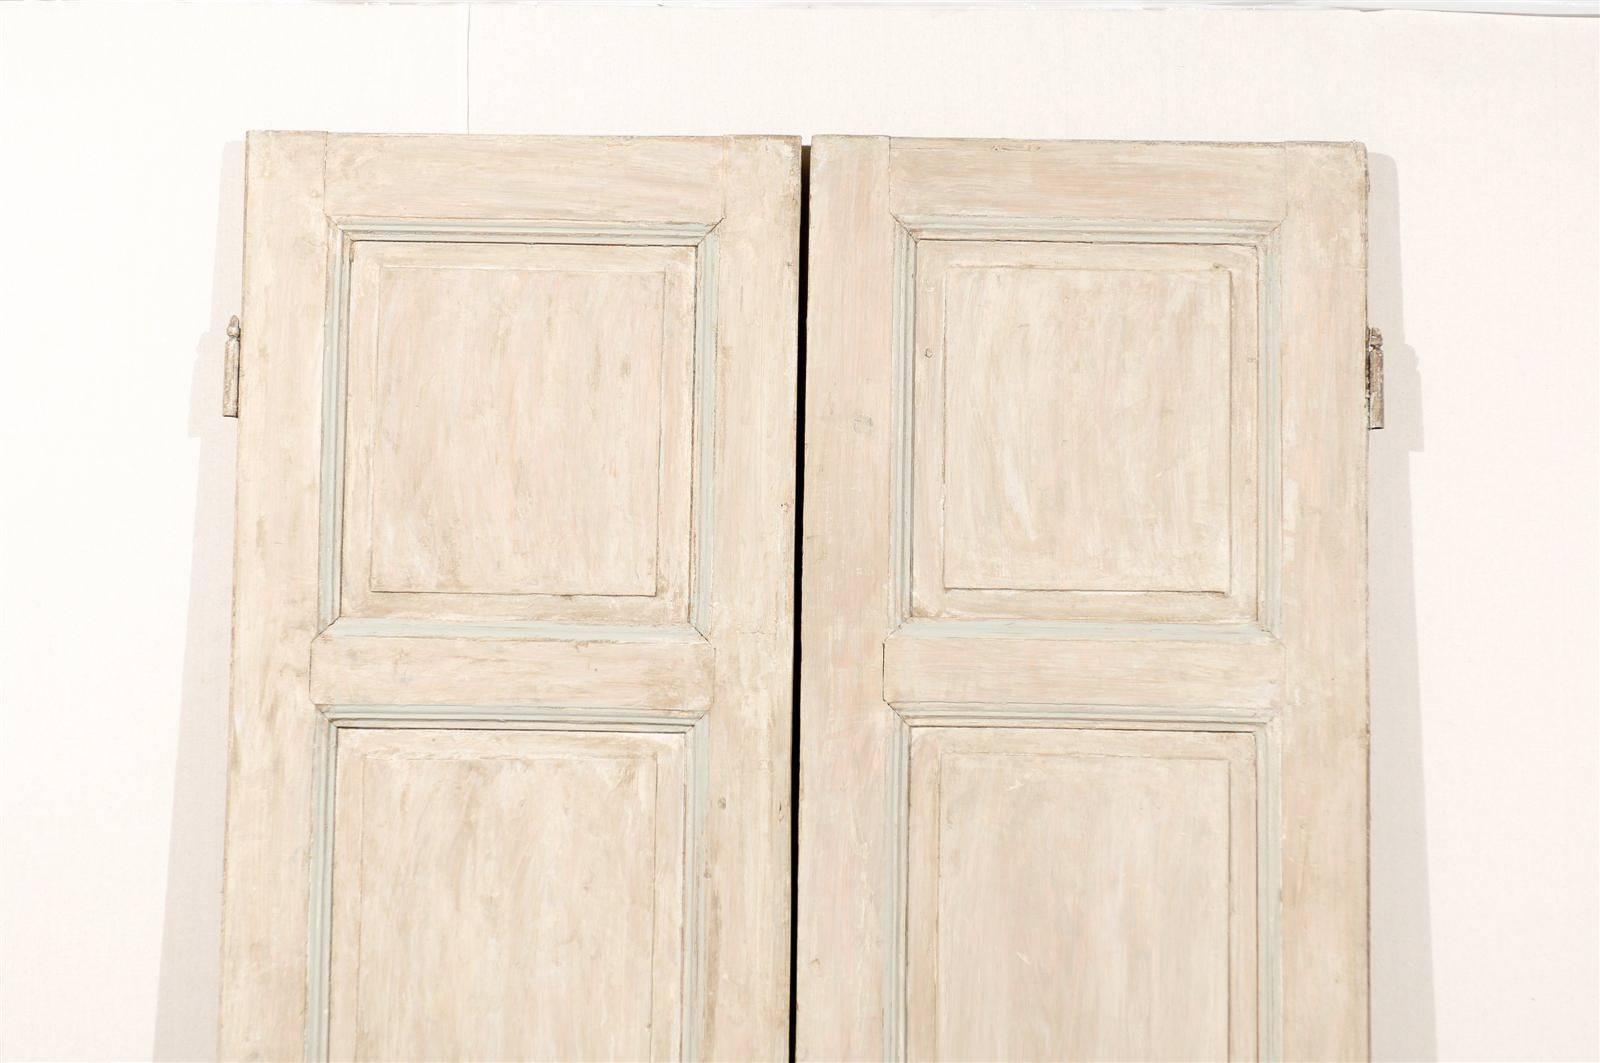 Pair of Tall French Doors from the Mid-19th Century (Gemalt)